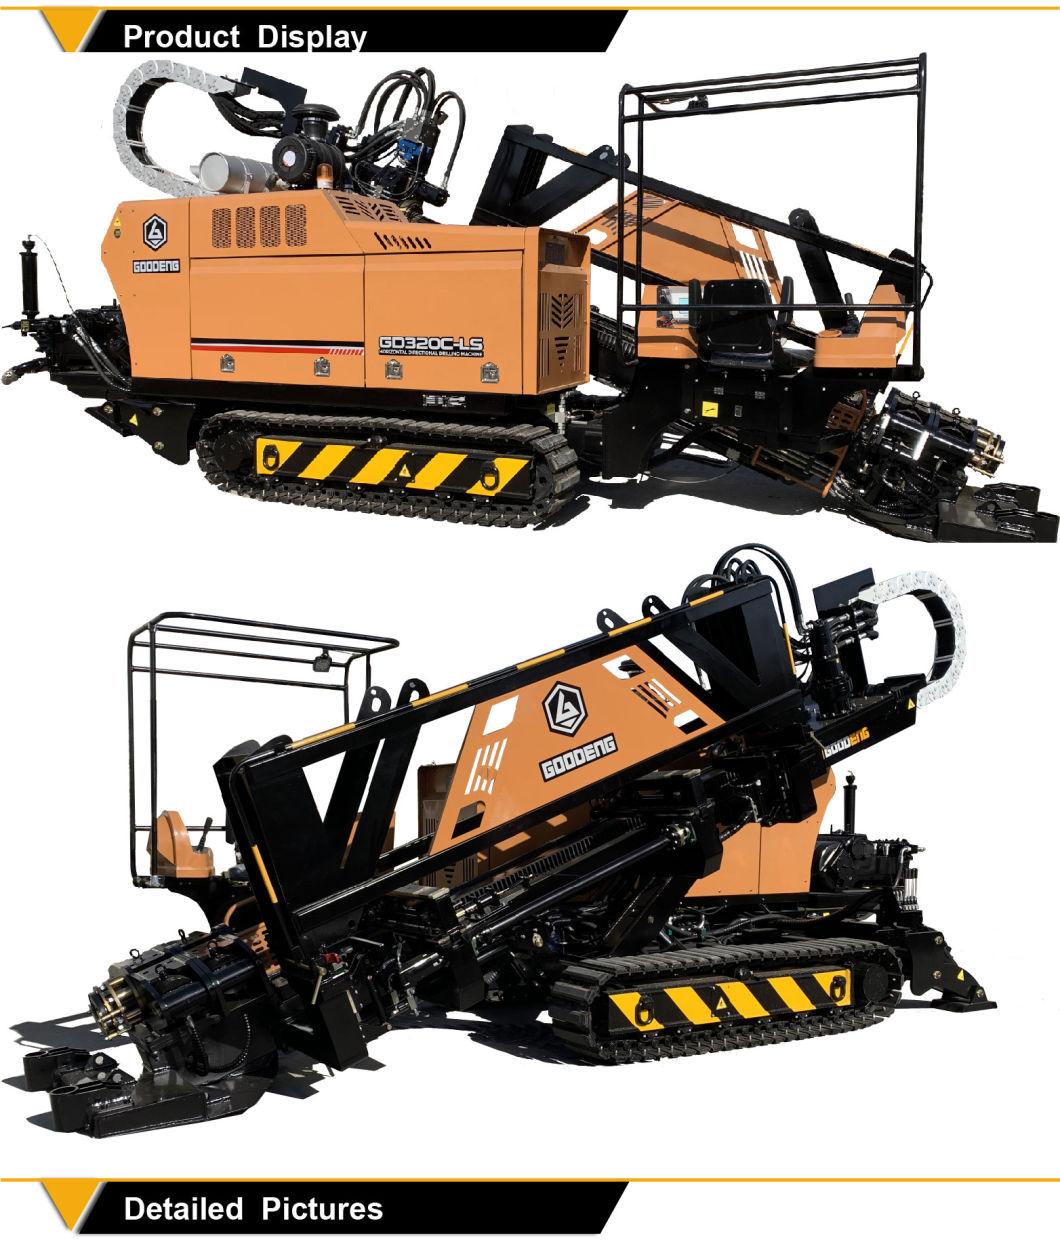 Goodeng GD320-LS trenchless machine for underground pipeline